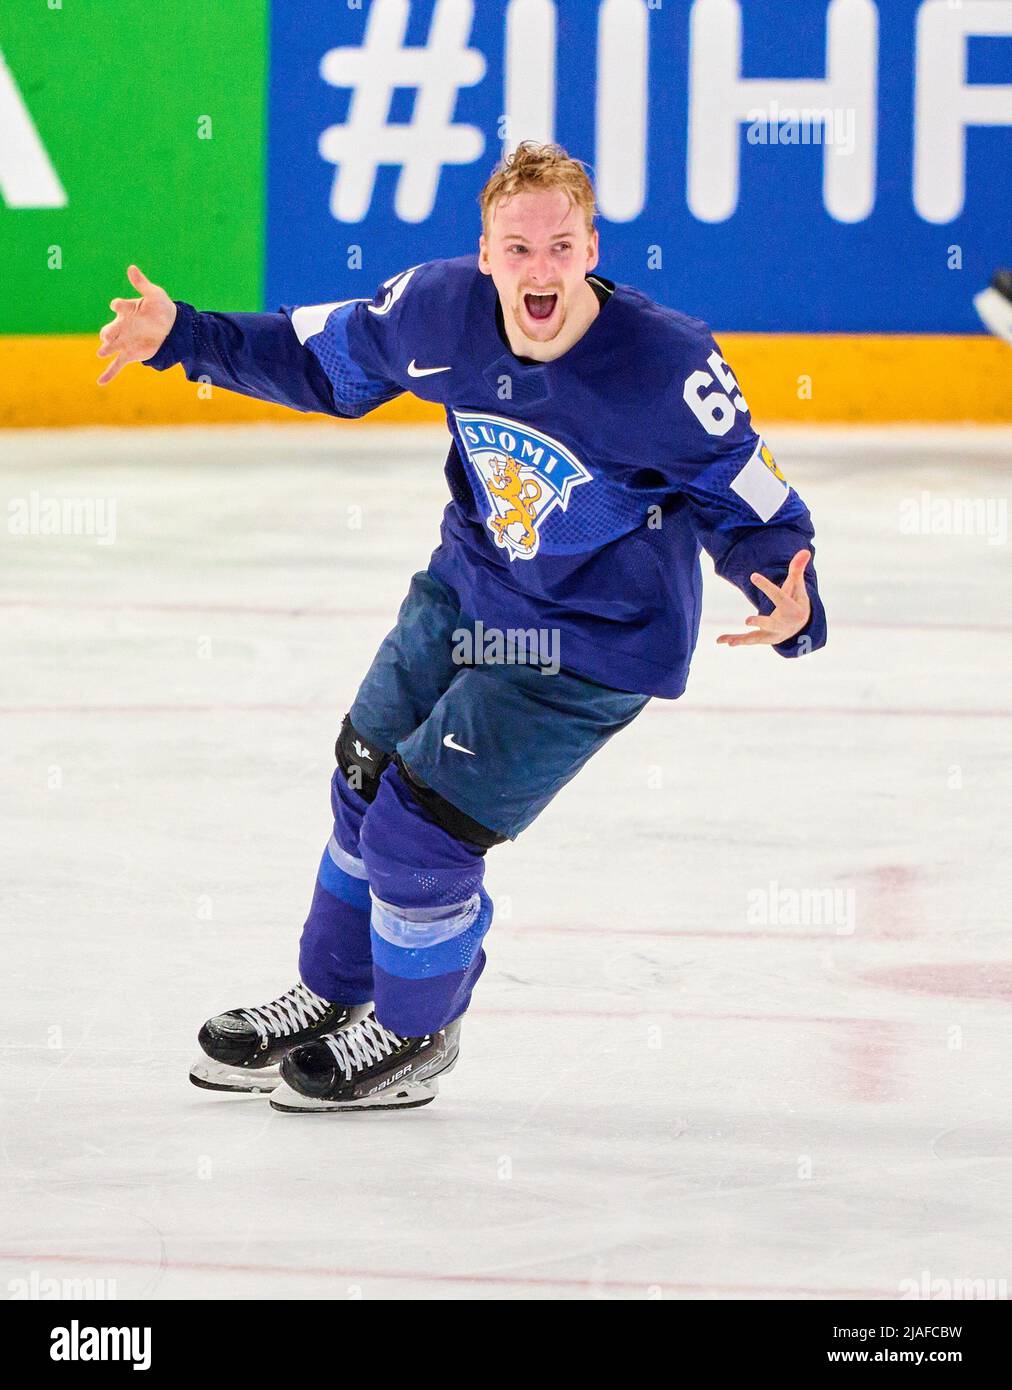 Sakari Manninen FIN Nr. 65 celebrates his 4-3 sudden death goal, happy,  laugh, celebration, in the match FINLAND - CANADA 4-3 after sudden death  IIHF ICE HOCKEY WORLD CHAMPIONSHIP final in Tampere,